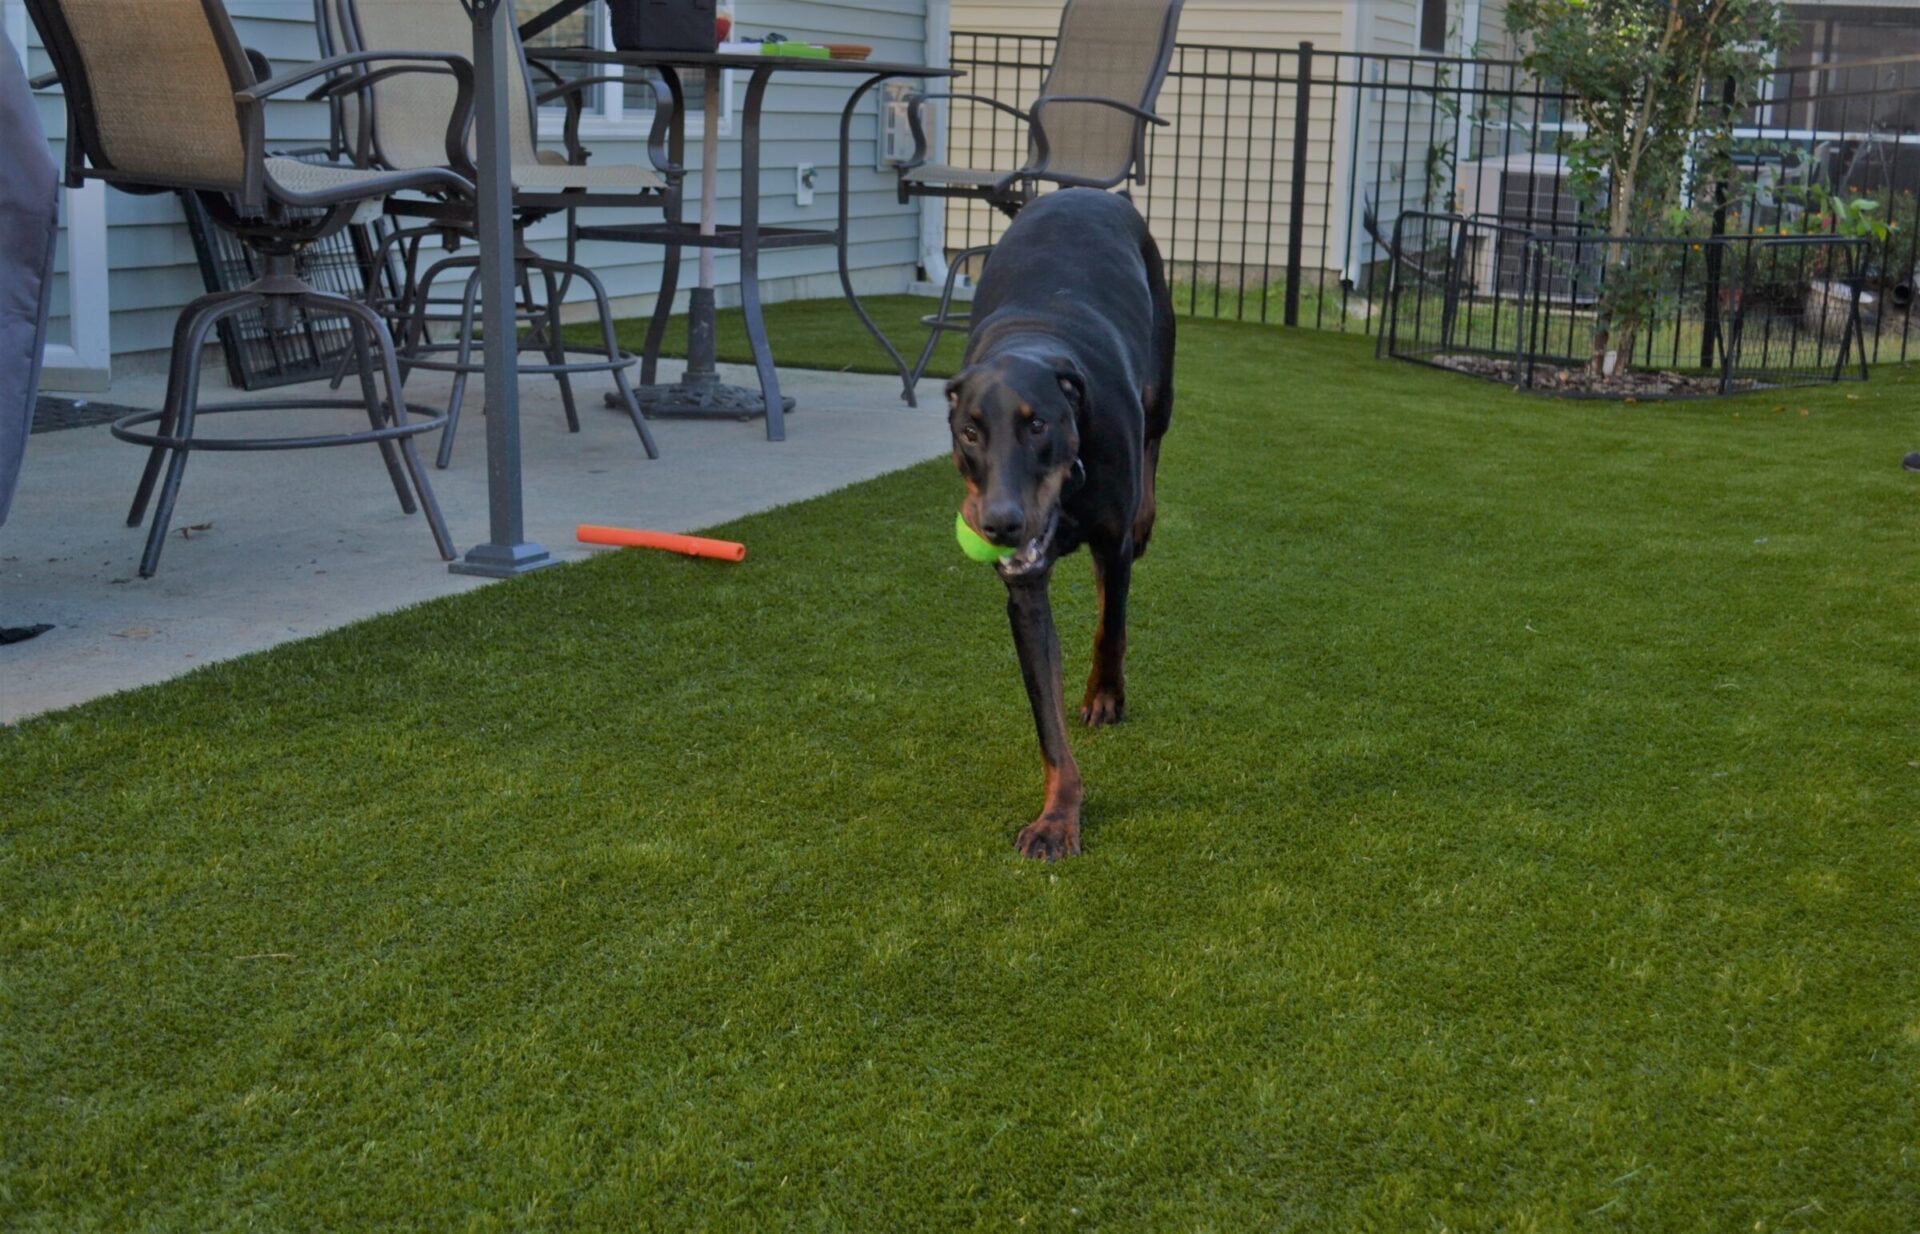 A black dog is carrying a tennis ball across a vibrant green lawn, with patio furniture and a fenced-off garden area in the background.